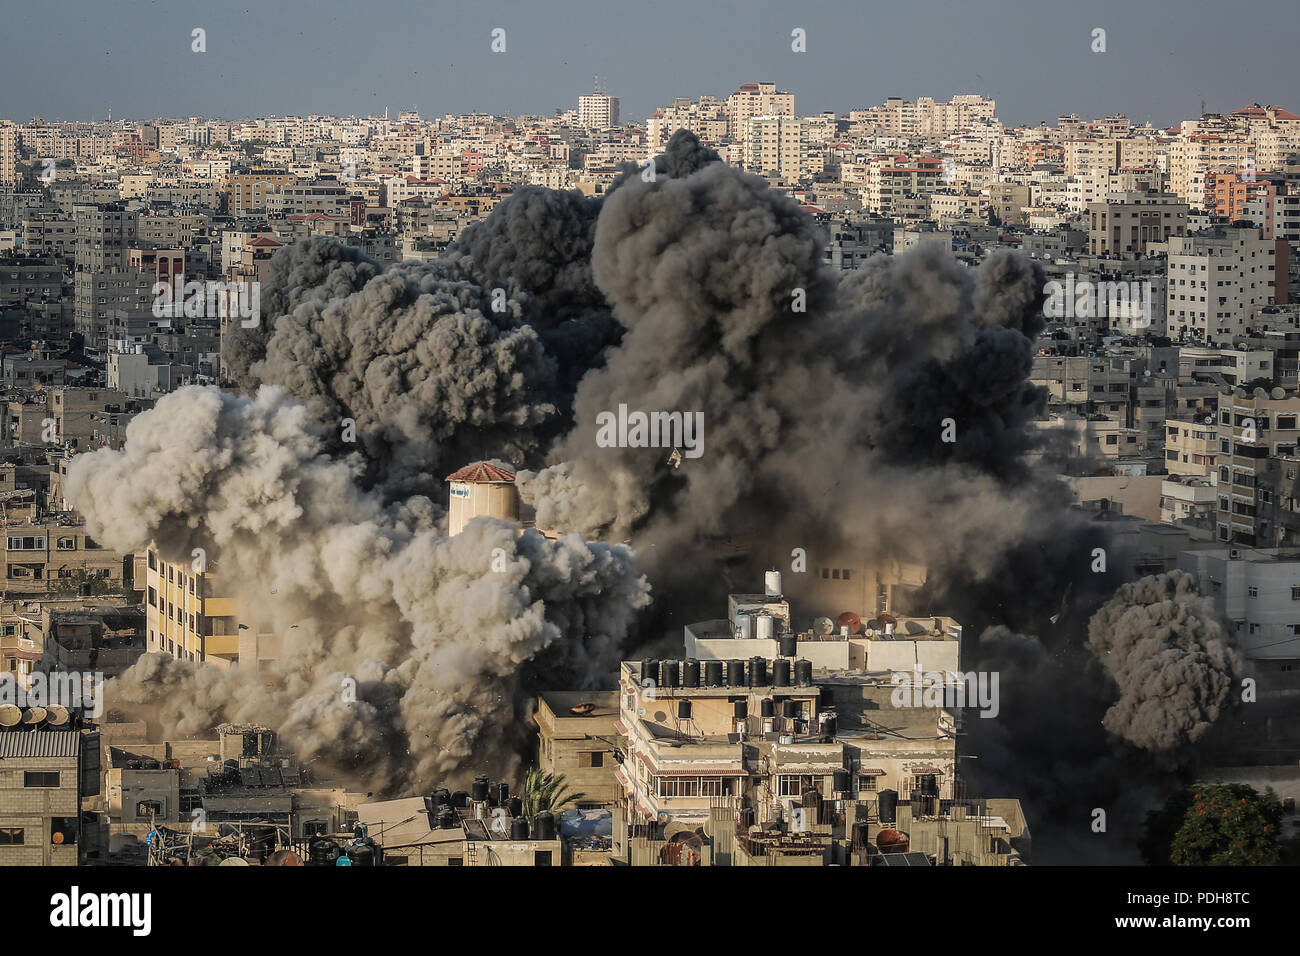 Gaza City, Gaza Strip. 09th Aug, 2018. Smoke rises from a multi-storey building after it was bombed by an Israeli aircraft in Gaza City, Gaza Strip, 09 August 2018. According to the Israeli Army, Israel has launched a wave of airstrikes on the Gaza strip in response to more than 180 rockets and mortars being fired into Israel, and gunfire earlier Wednesday that targeted civilian construction workers on the Gaza border. Credit: Emad Awad/dpa/Alamy Live News Stock Photo